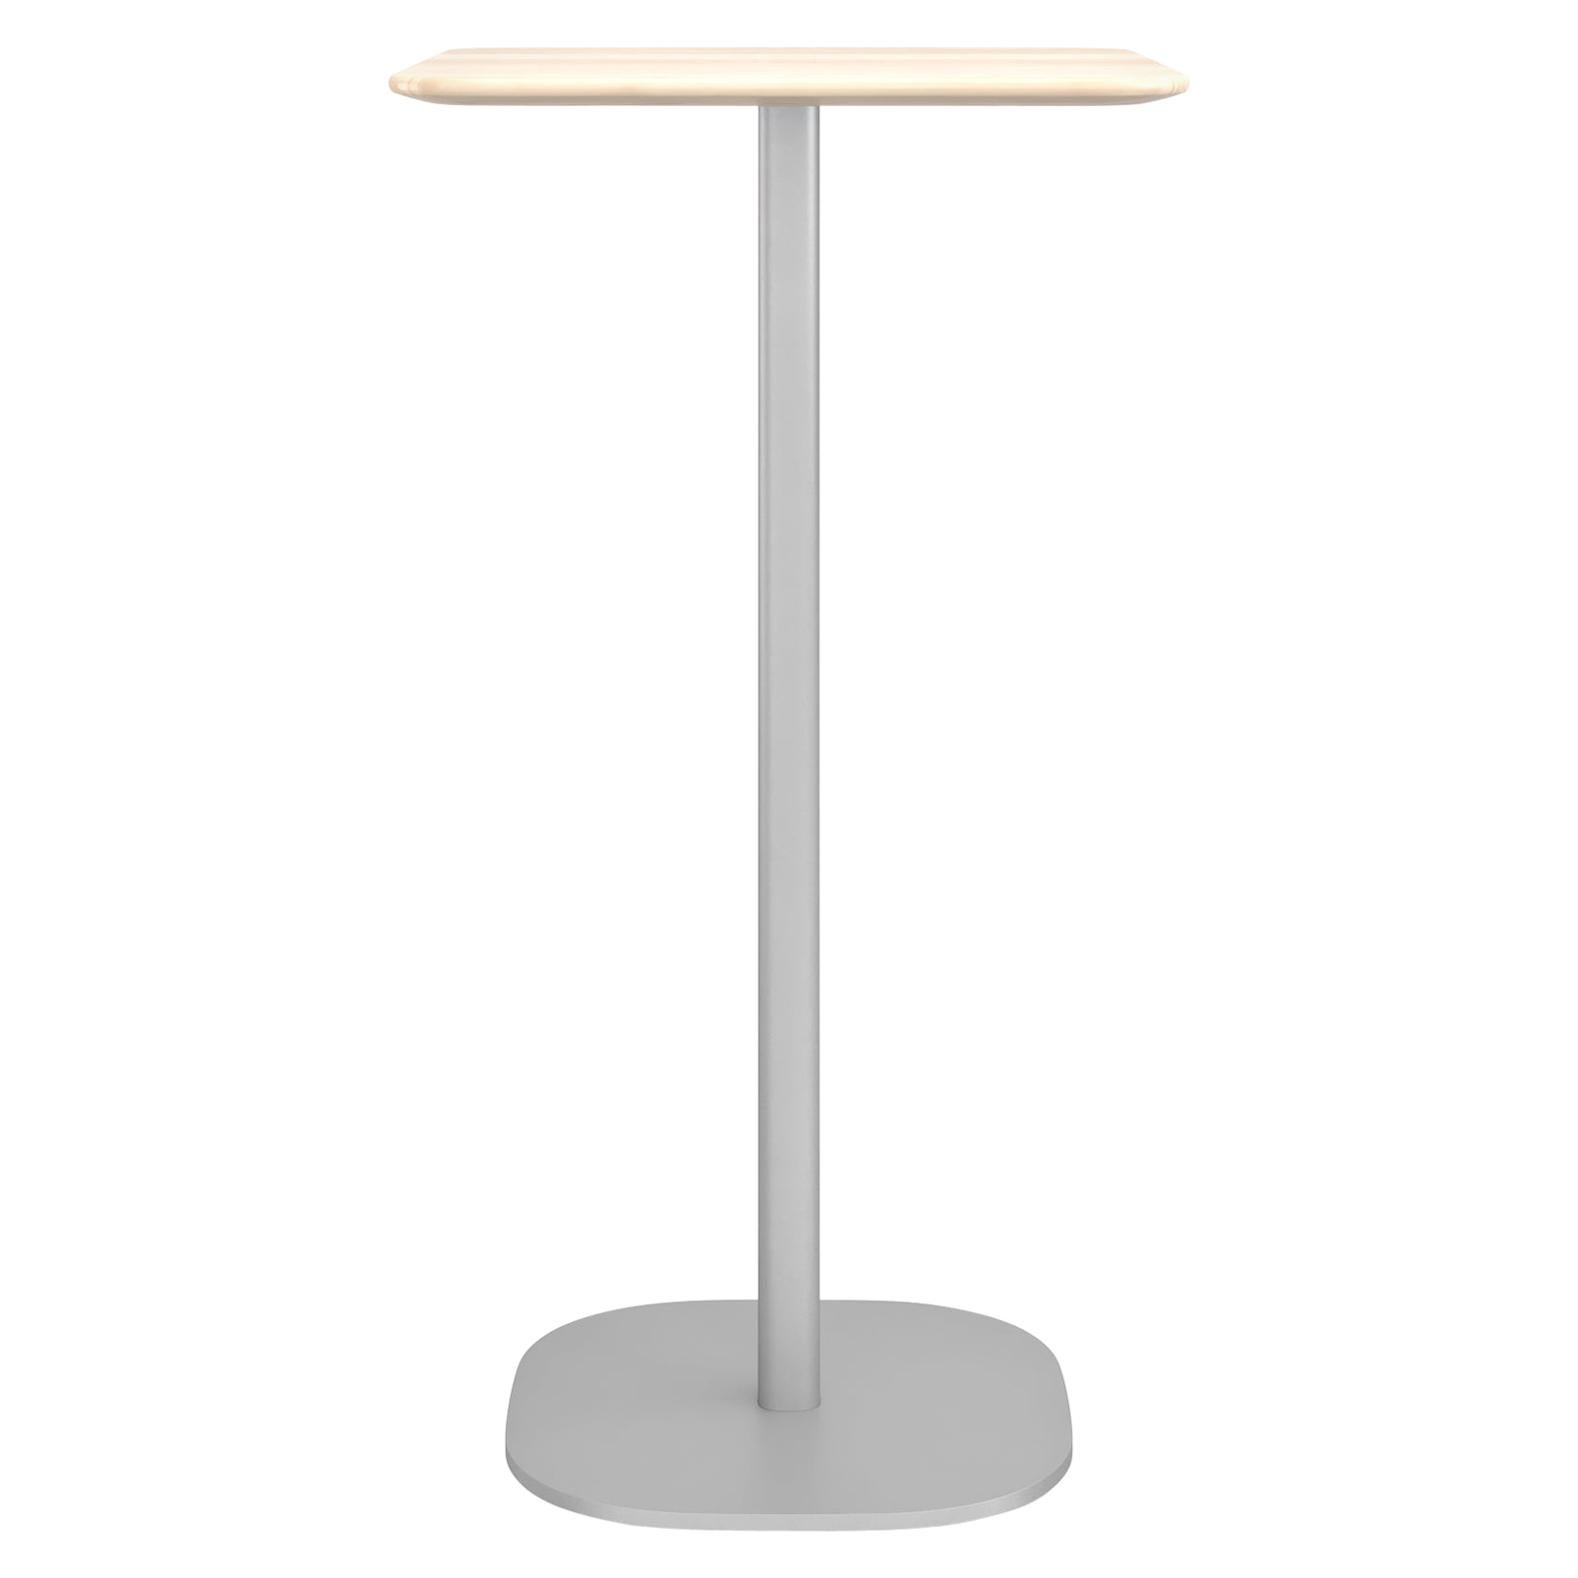 Emeco 2 Inch Small Bar Table with Aluminum Legs & Wood Top by Jasper Morrison